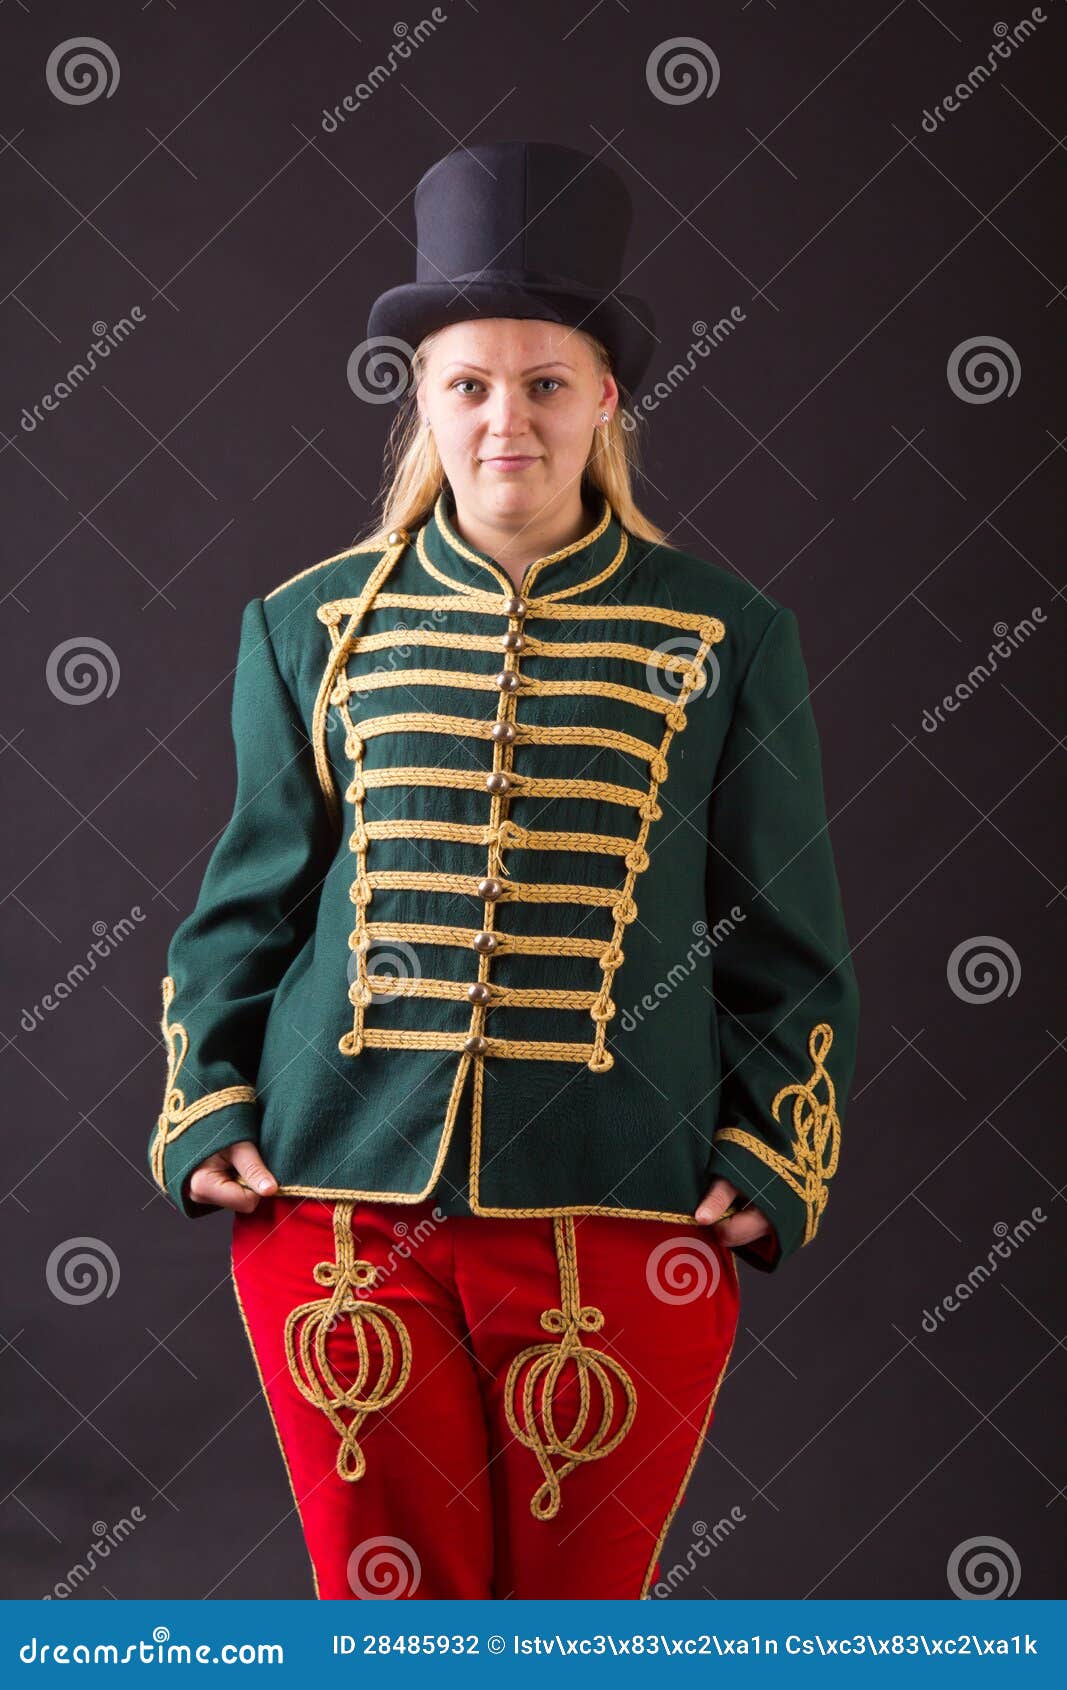 Hungarian hussar woman stock photo. Image of armed, commander - 28485932